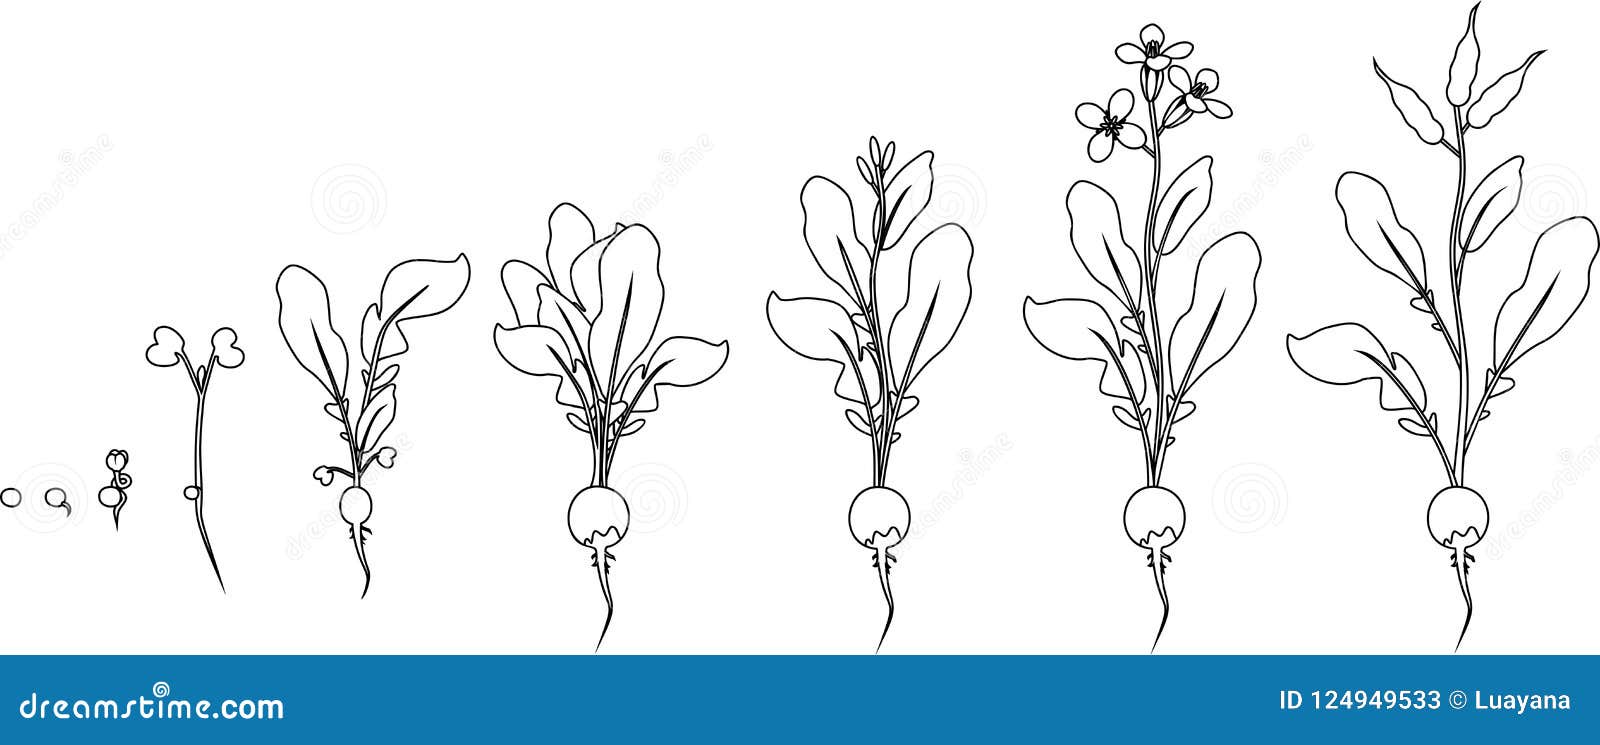 coloring page. stages of radish growth from seed and sprout to flowering and fruit-bearing plant